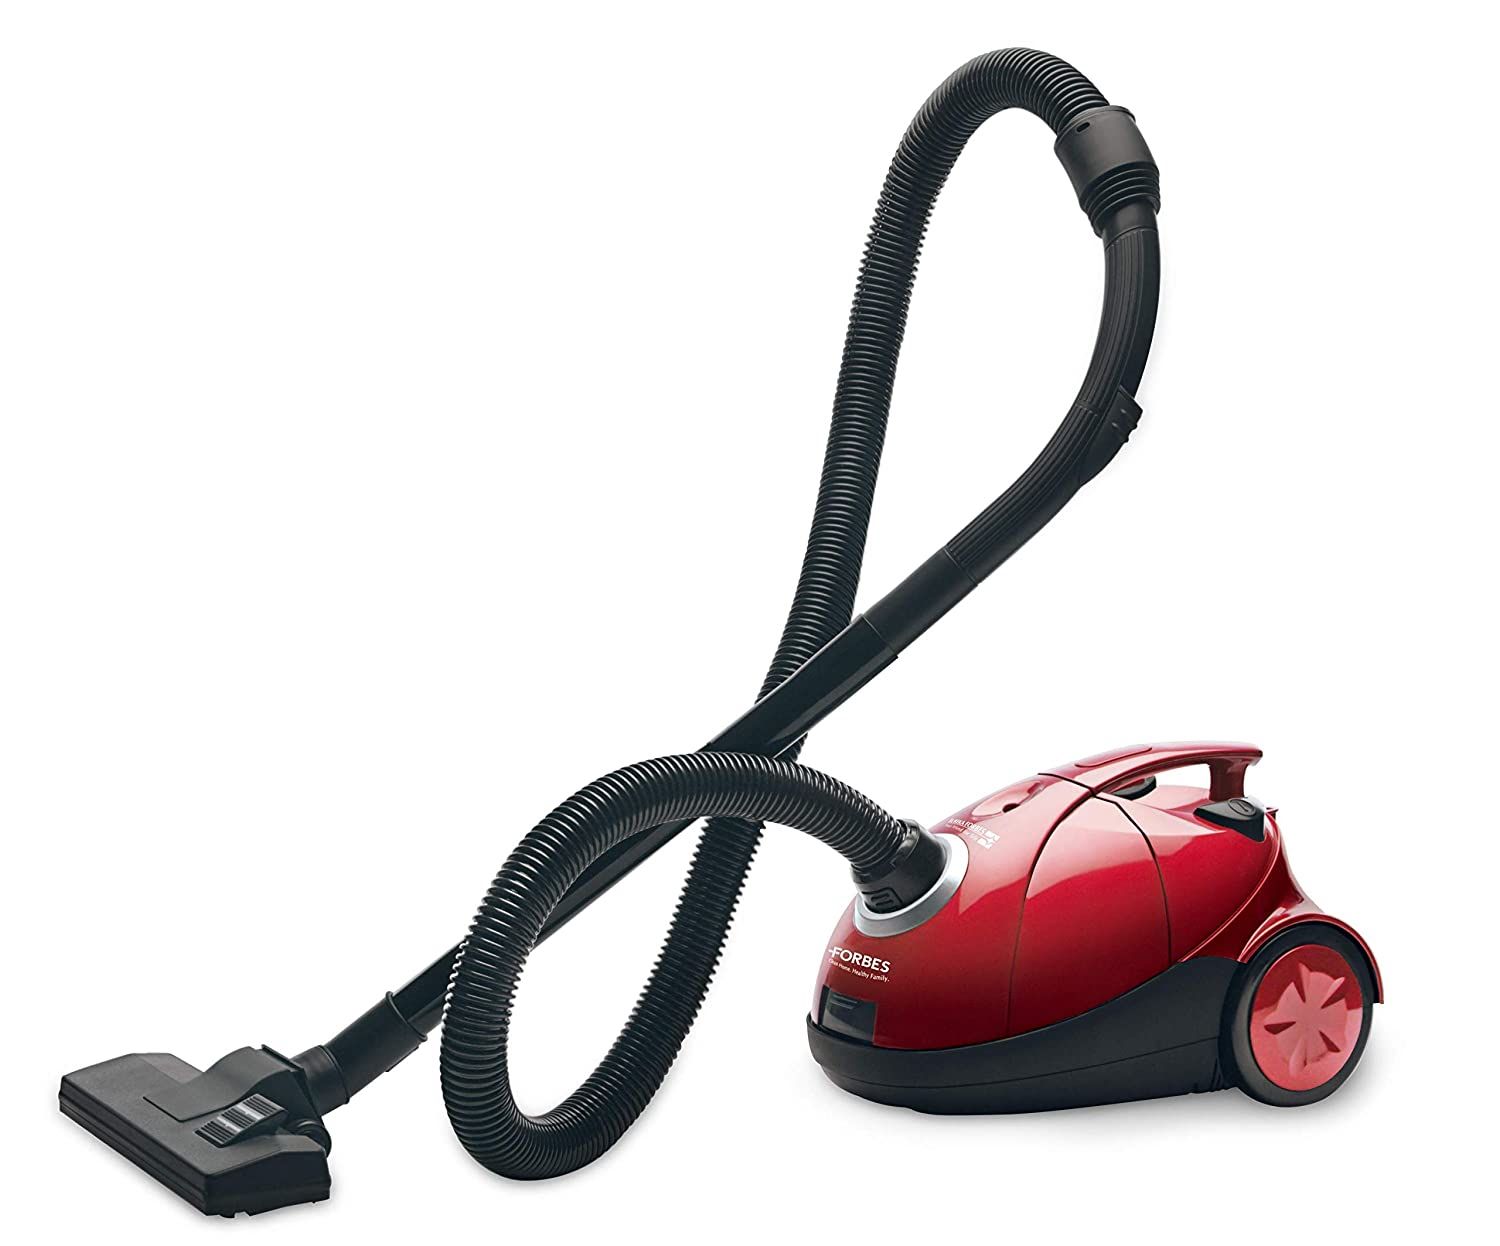 Eureka Forbes Quick Clean DX Vacuum Cleaner with 1200 Watts